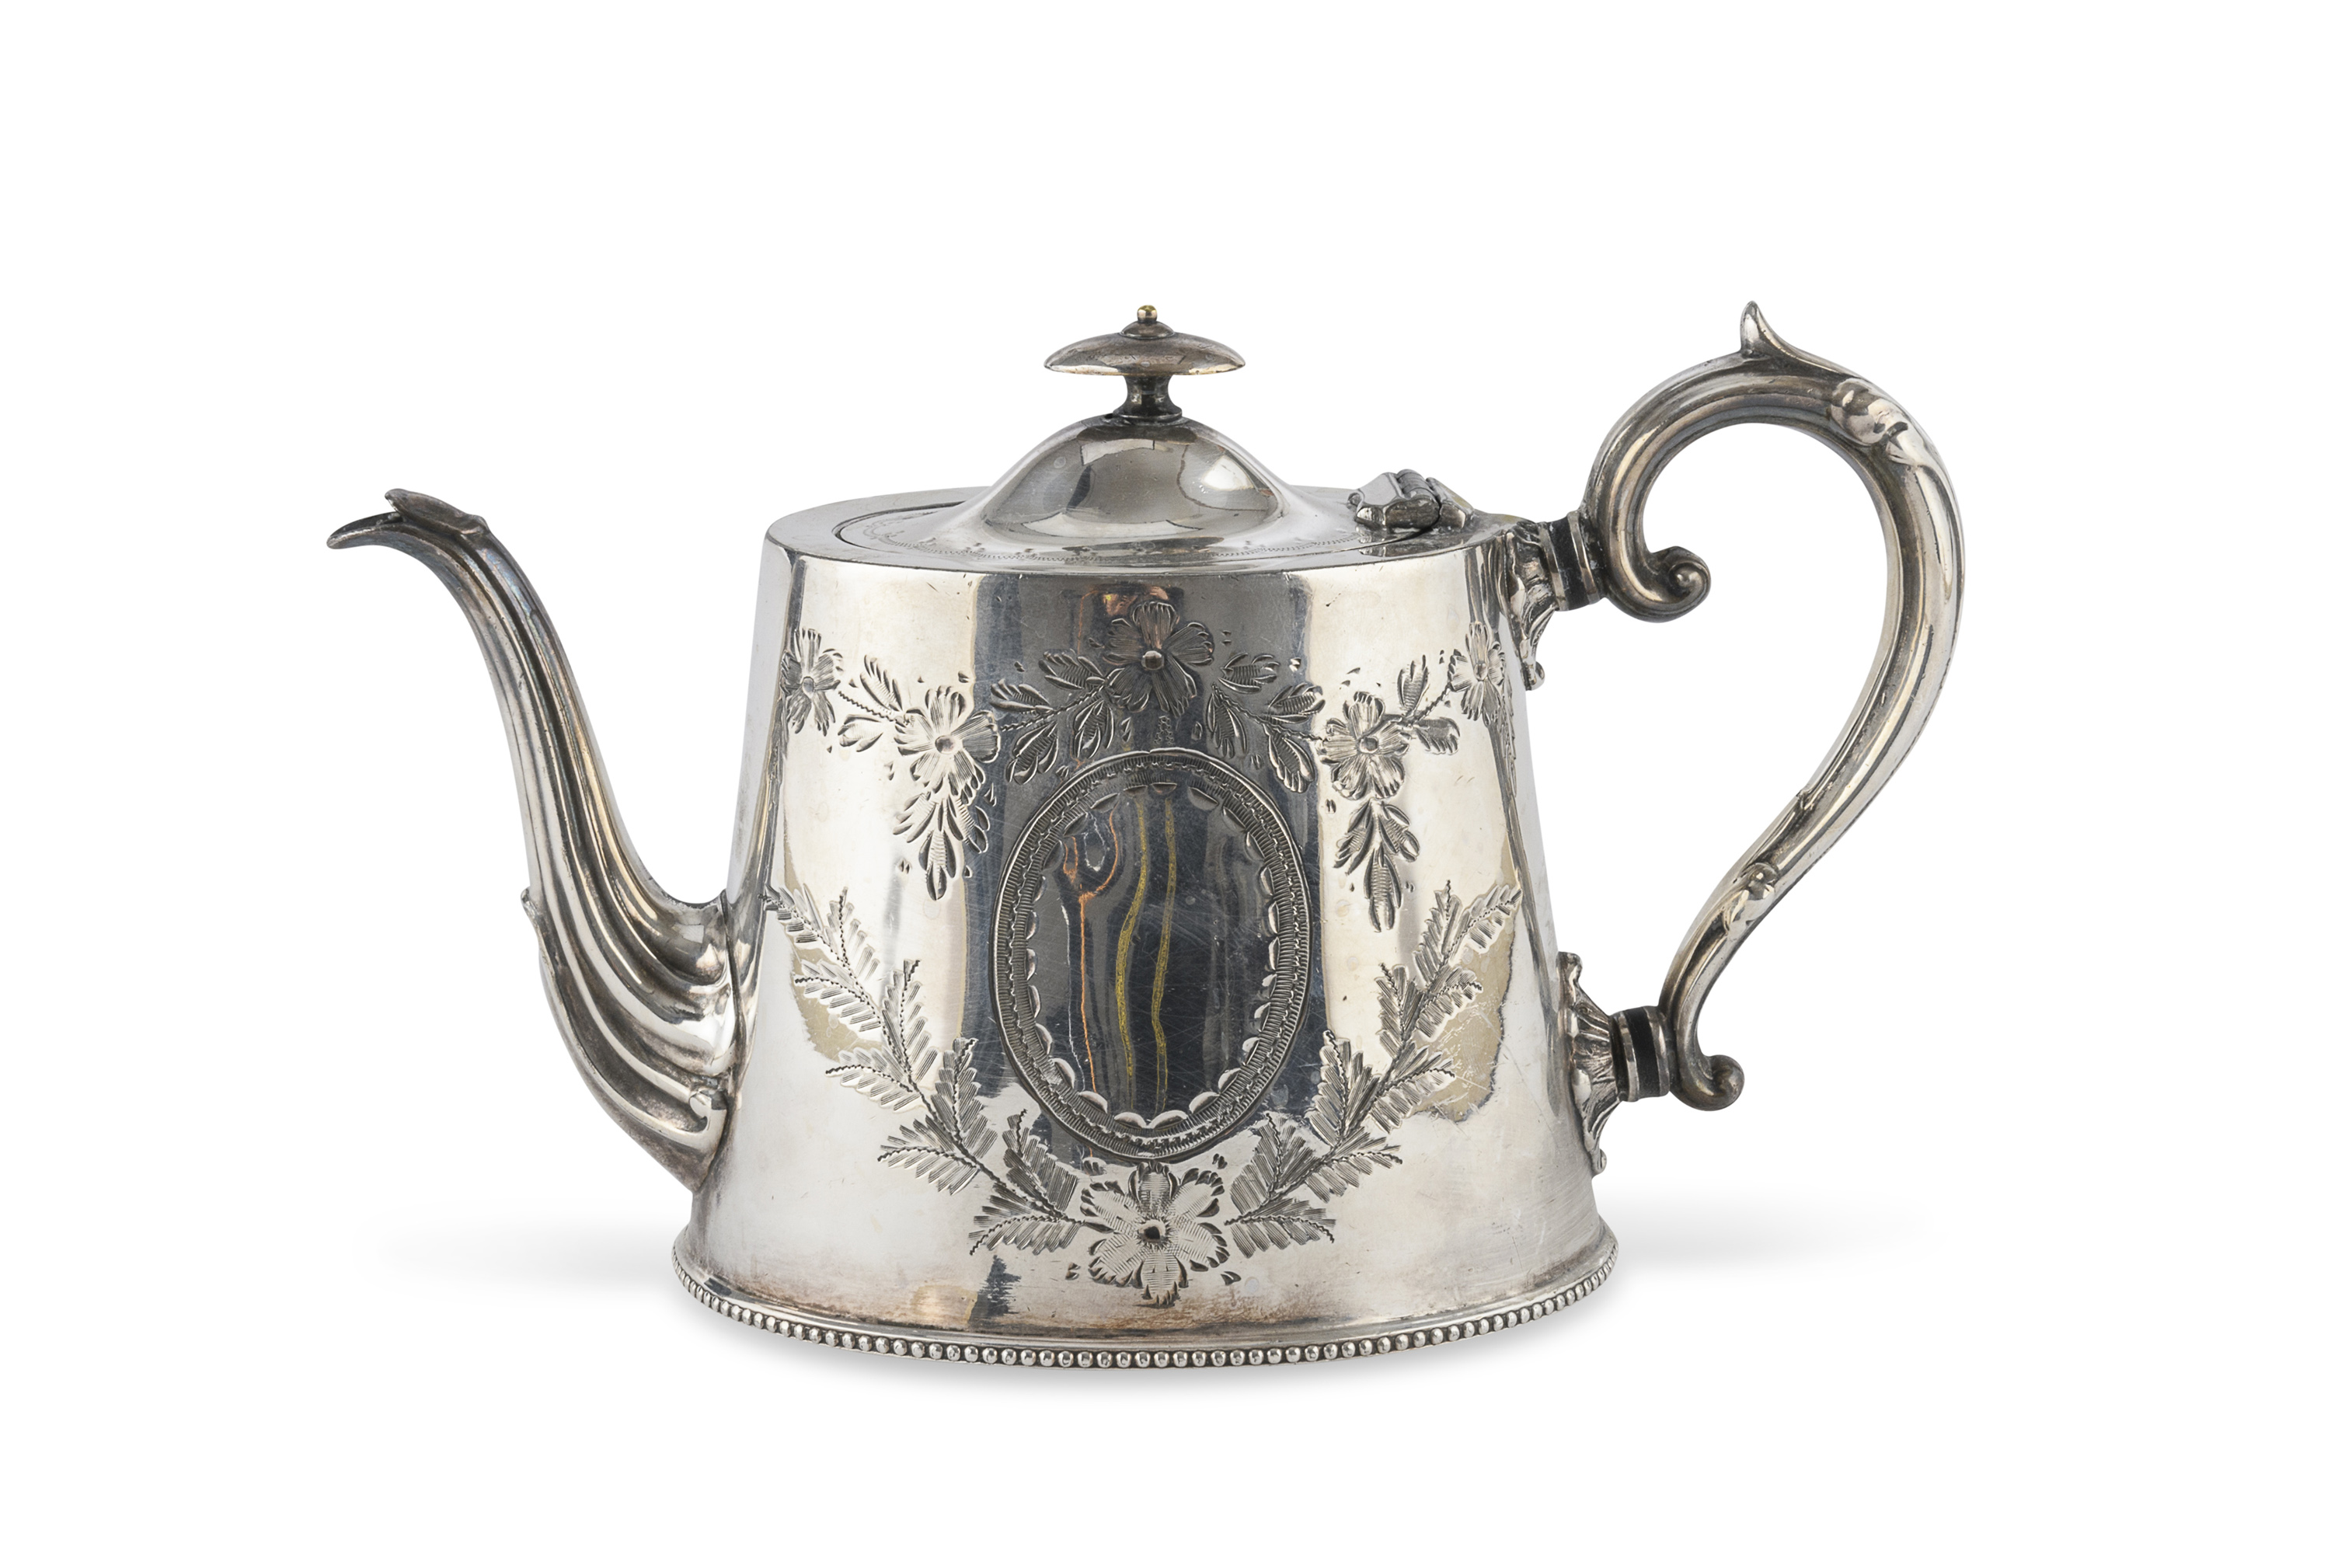 SILVER-PLATED TEAPOT ENGLAND EARLY 20TH CENTURY